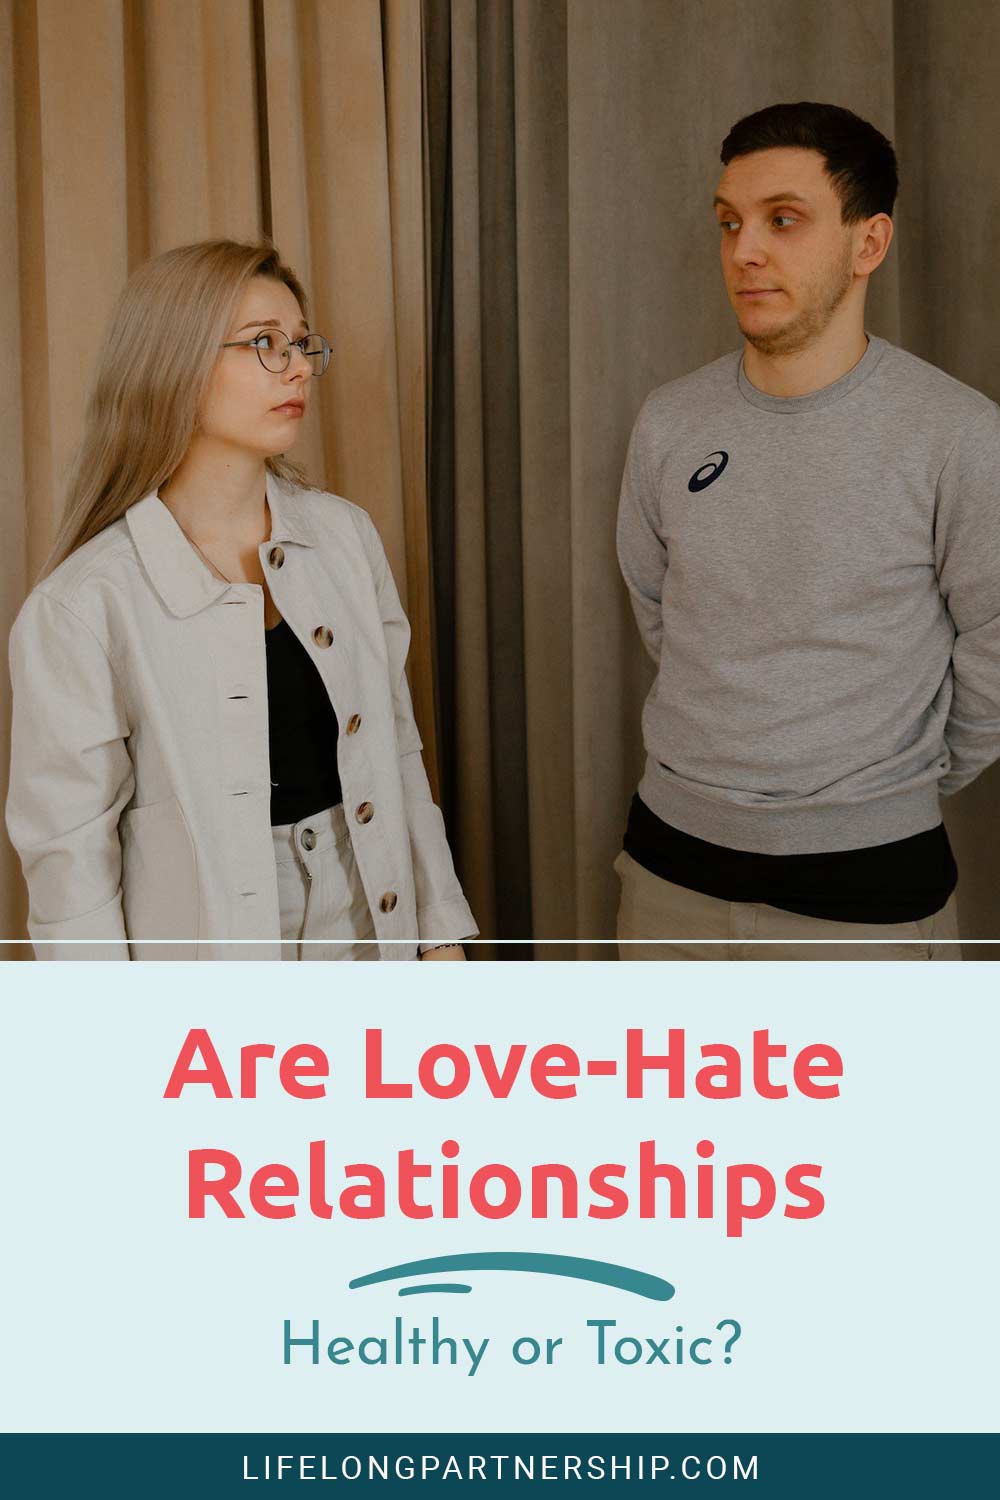 Man and woman looking at each other being confused - Are Love-Hate Relationships Healthy or Toxic?